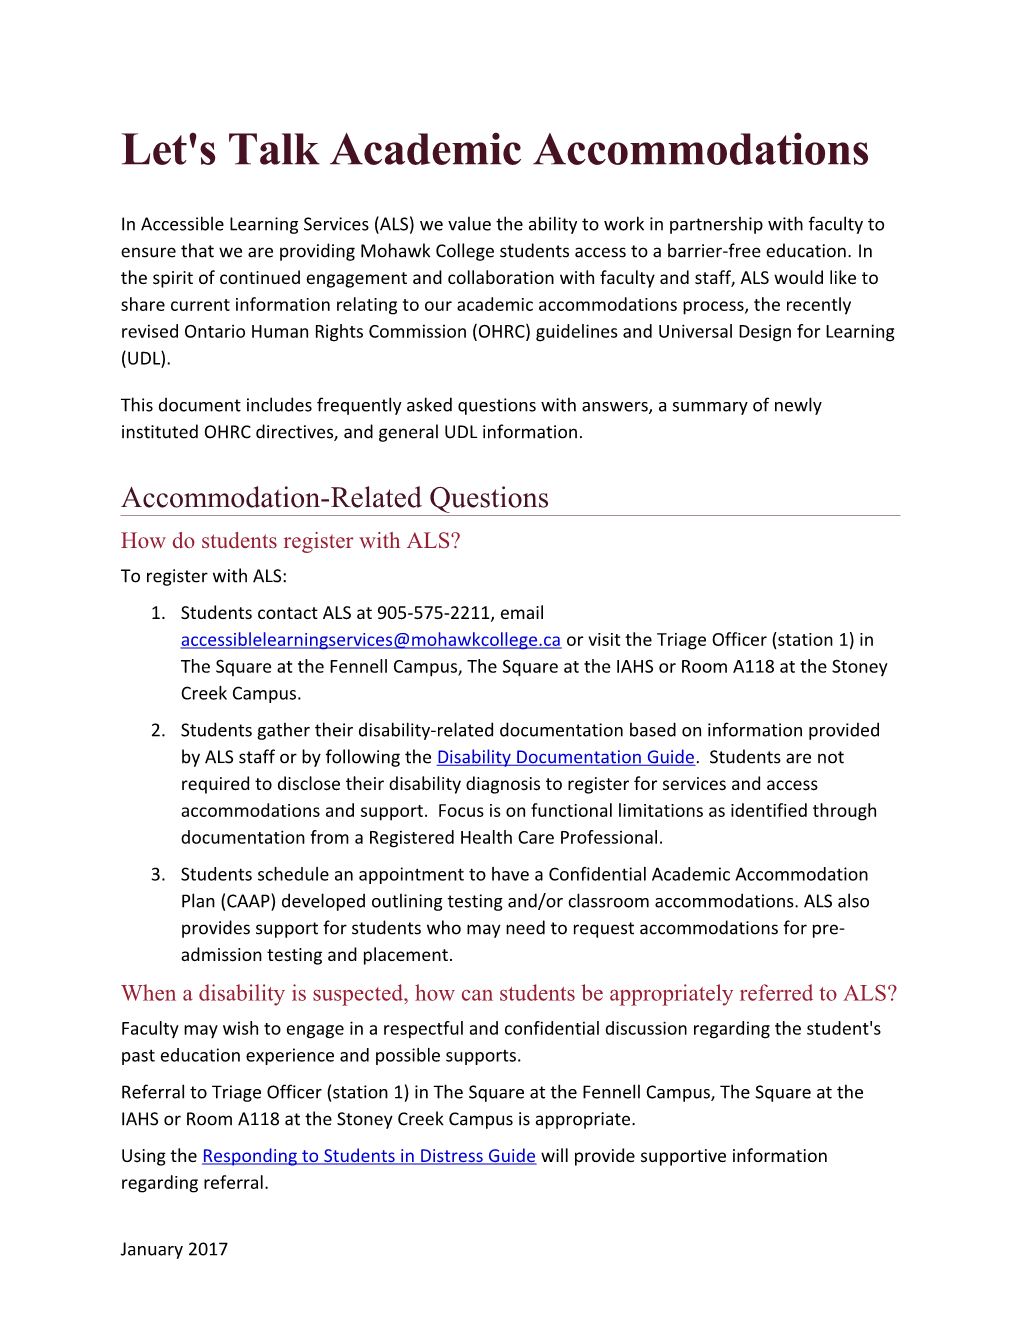 Let's Talk Academic Accommodations